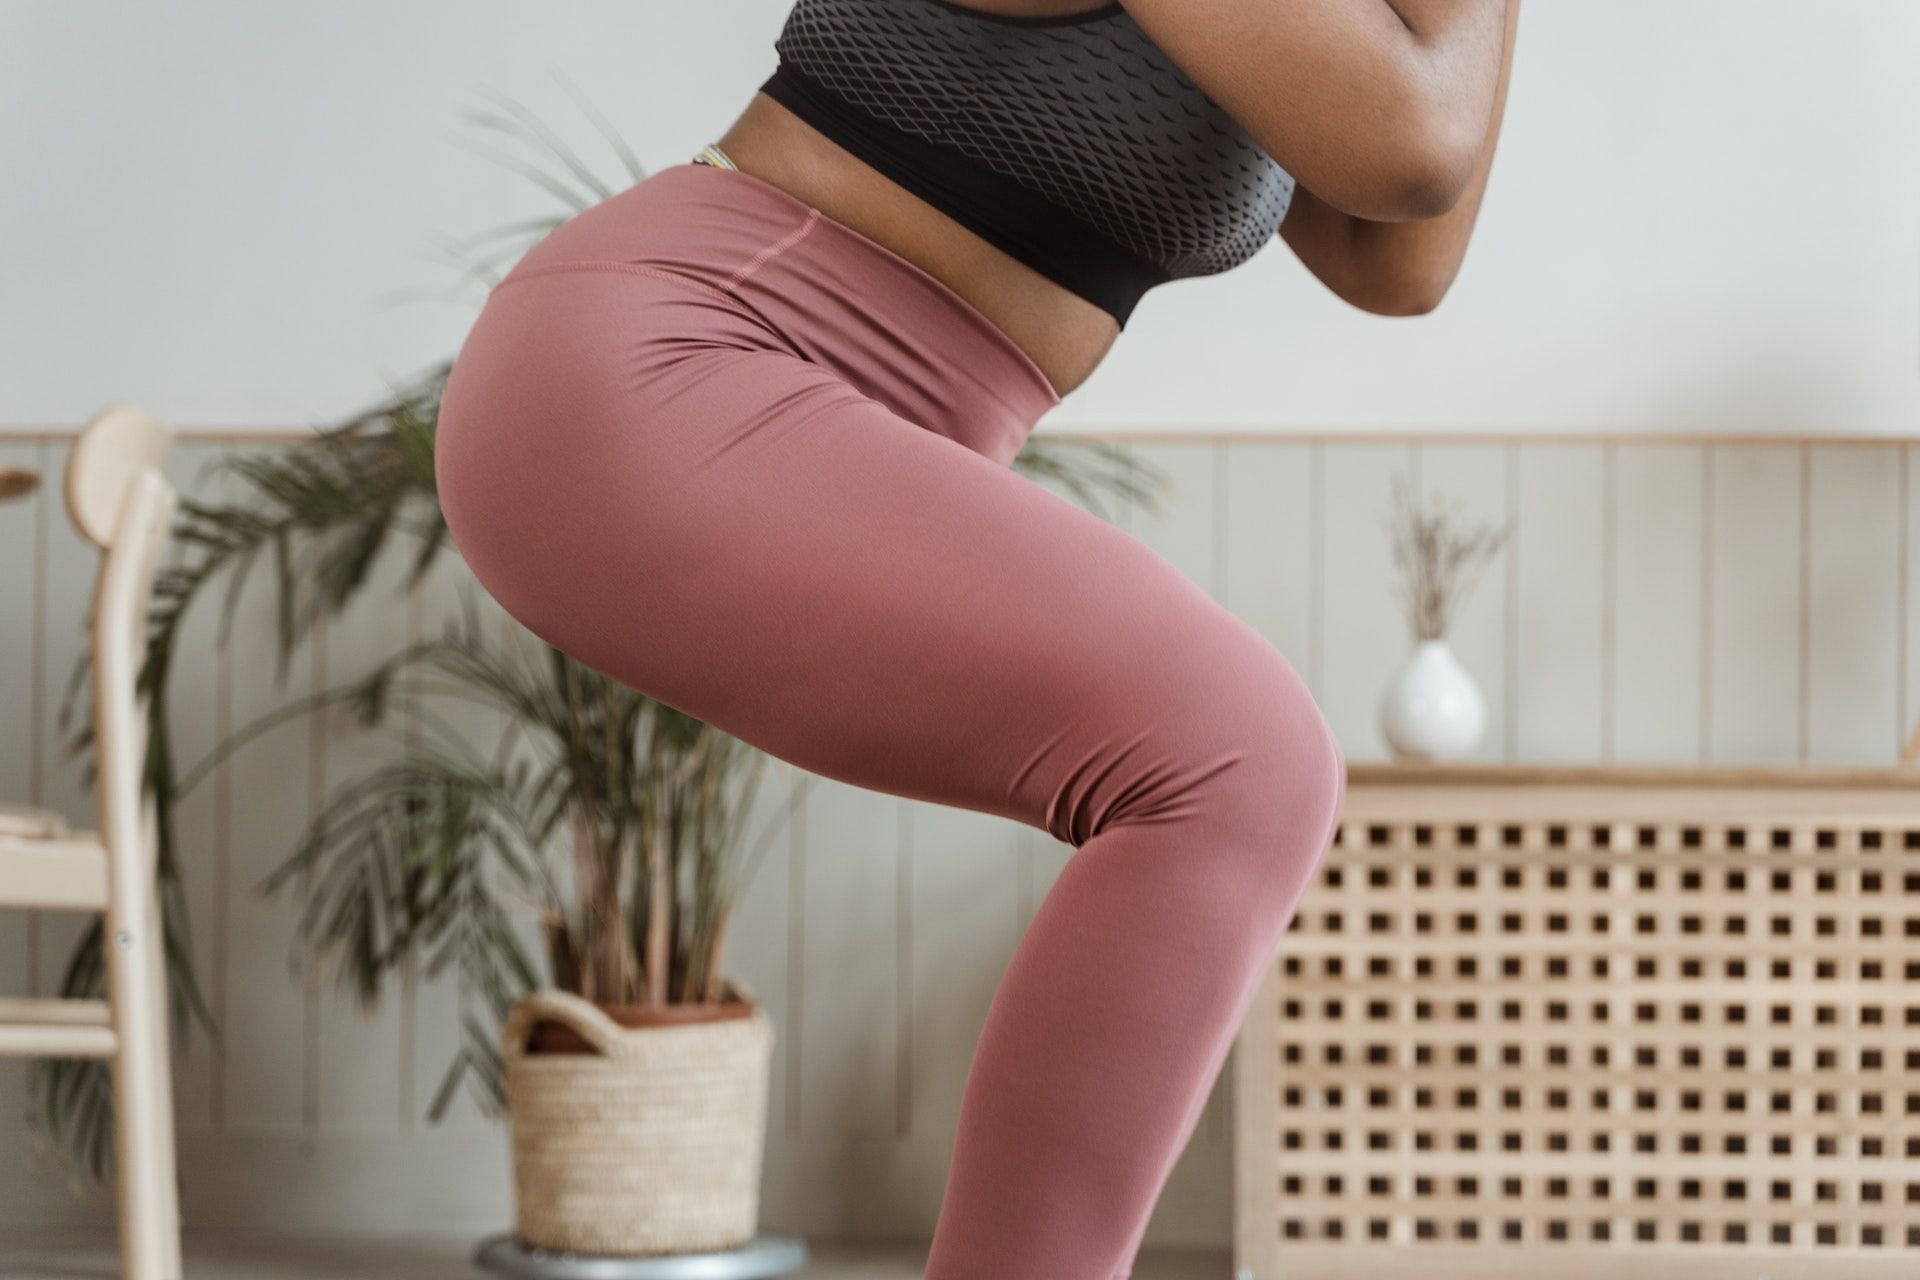 Squats work the entire lower-body muscles. (Photo via Pexels/MART PRODUCTION)